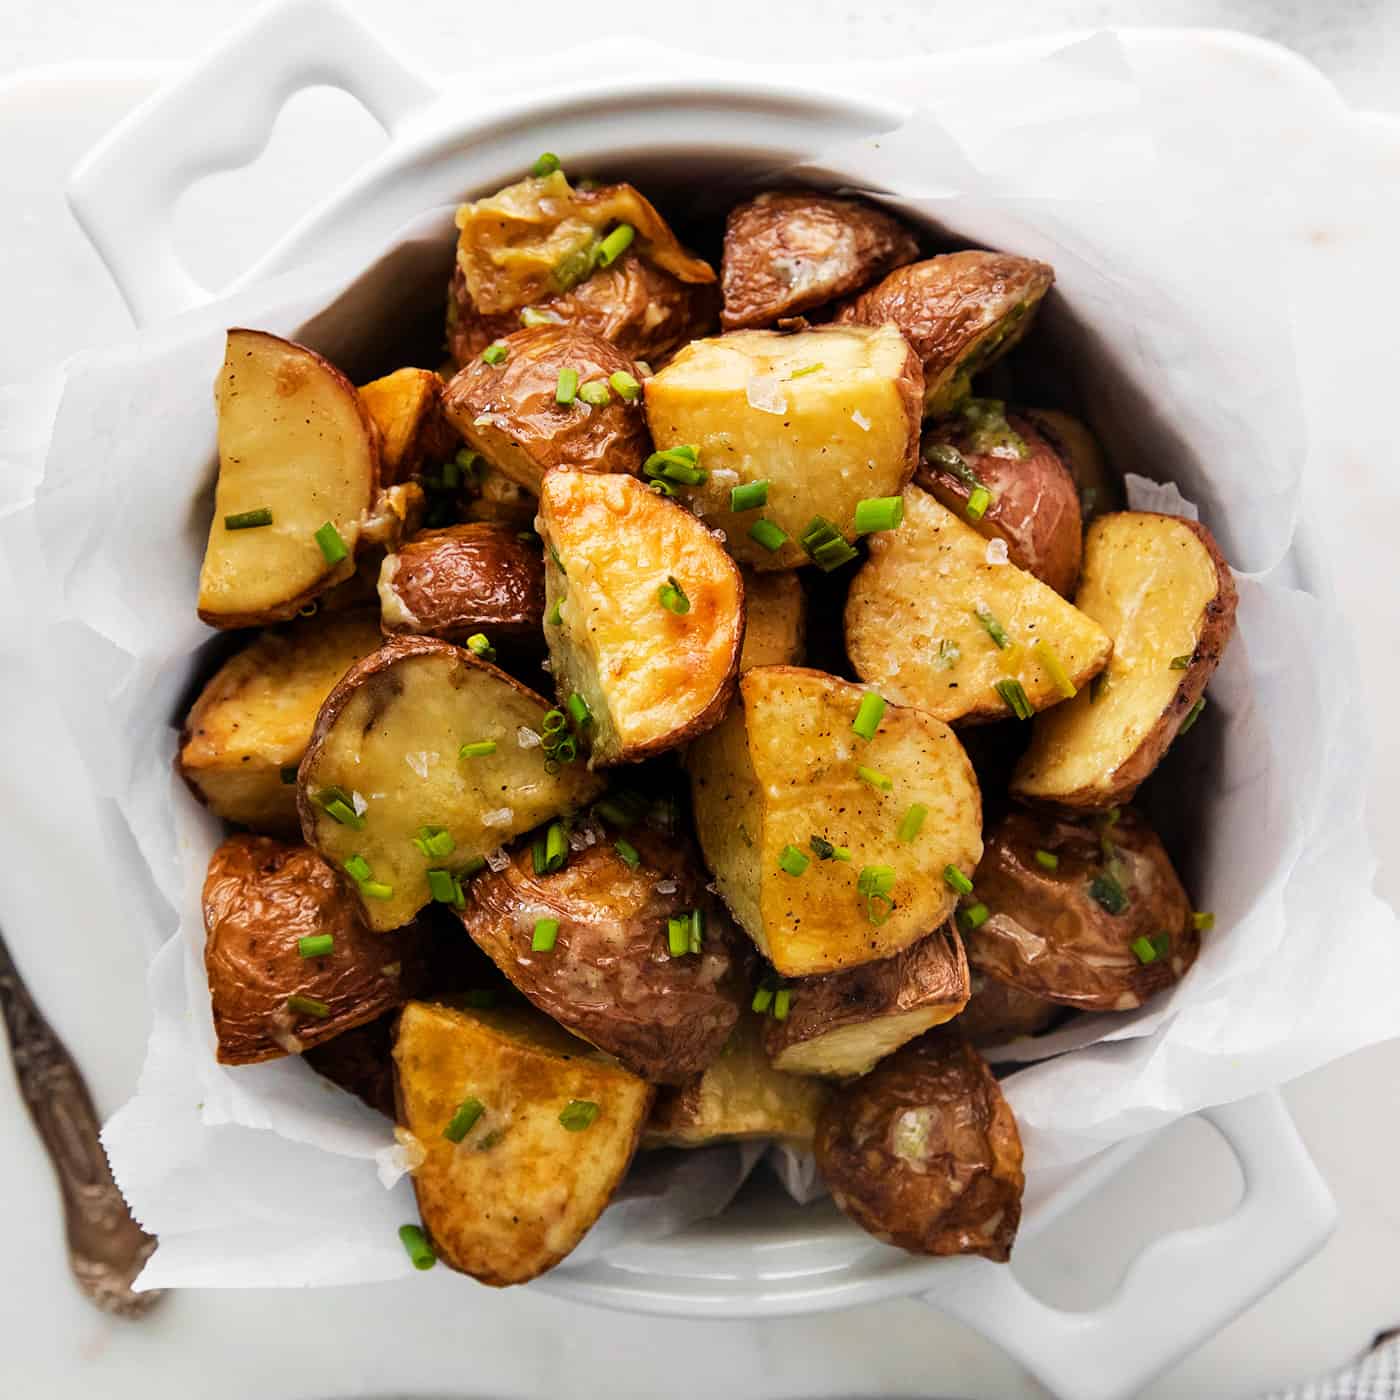 Overhead view of a bowl of garlic roasted new potatoes